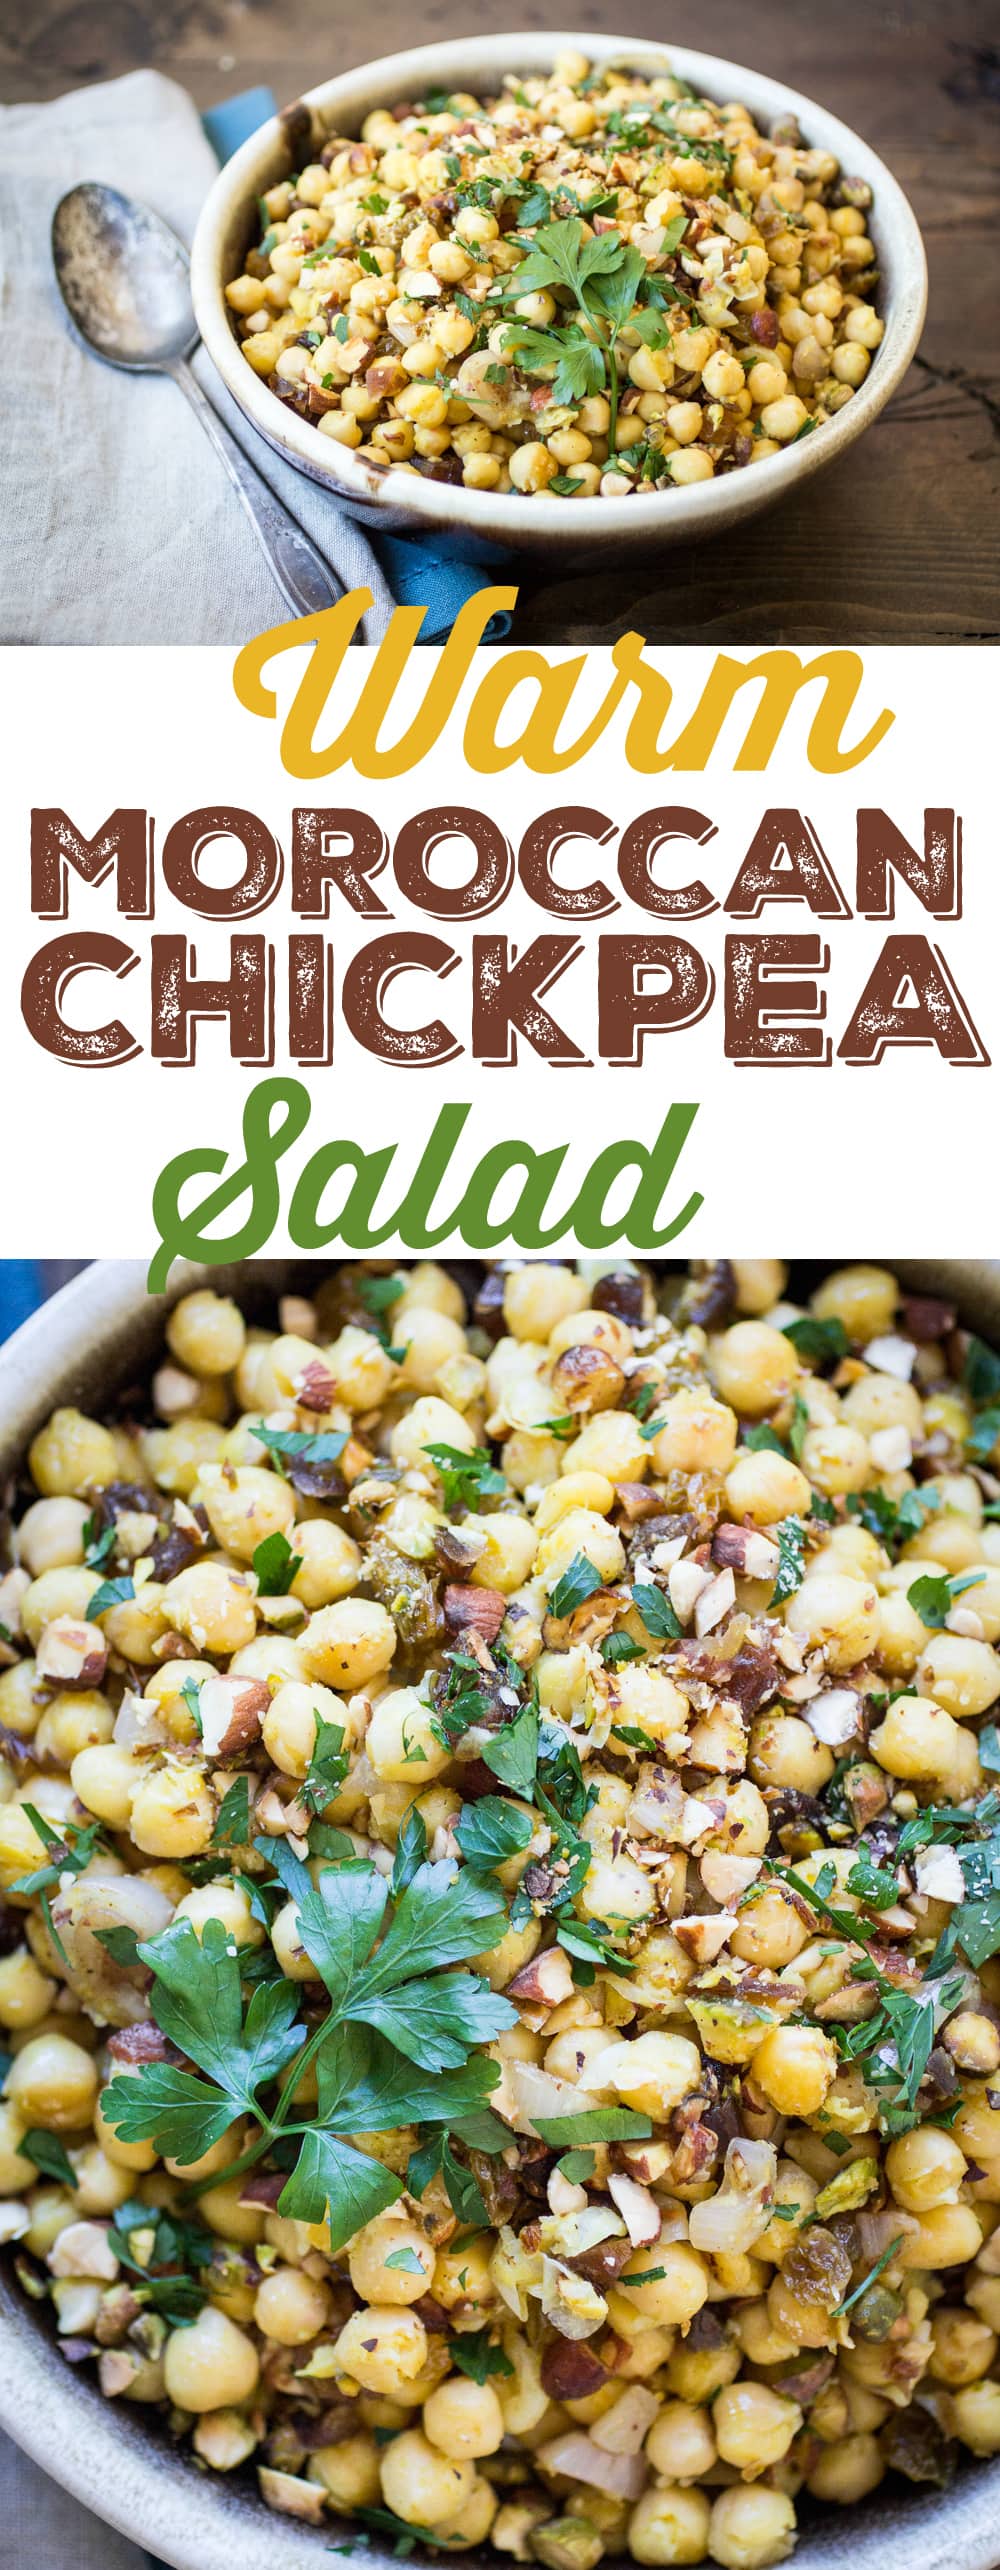 Dried dates and crunch pistachios make this Moroccan Chickpea Salad both sweet and savory!